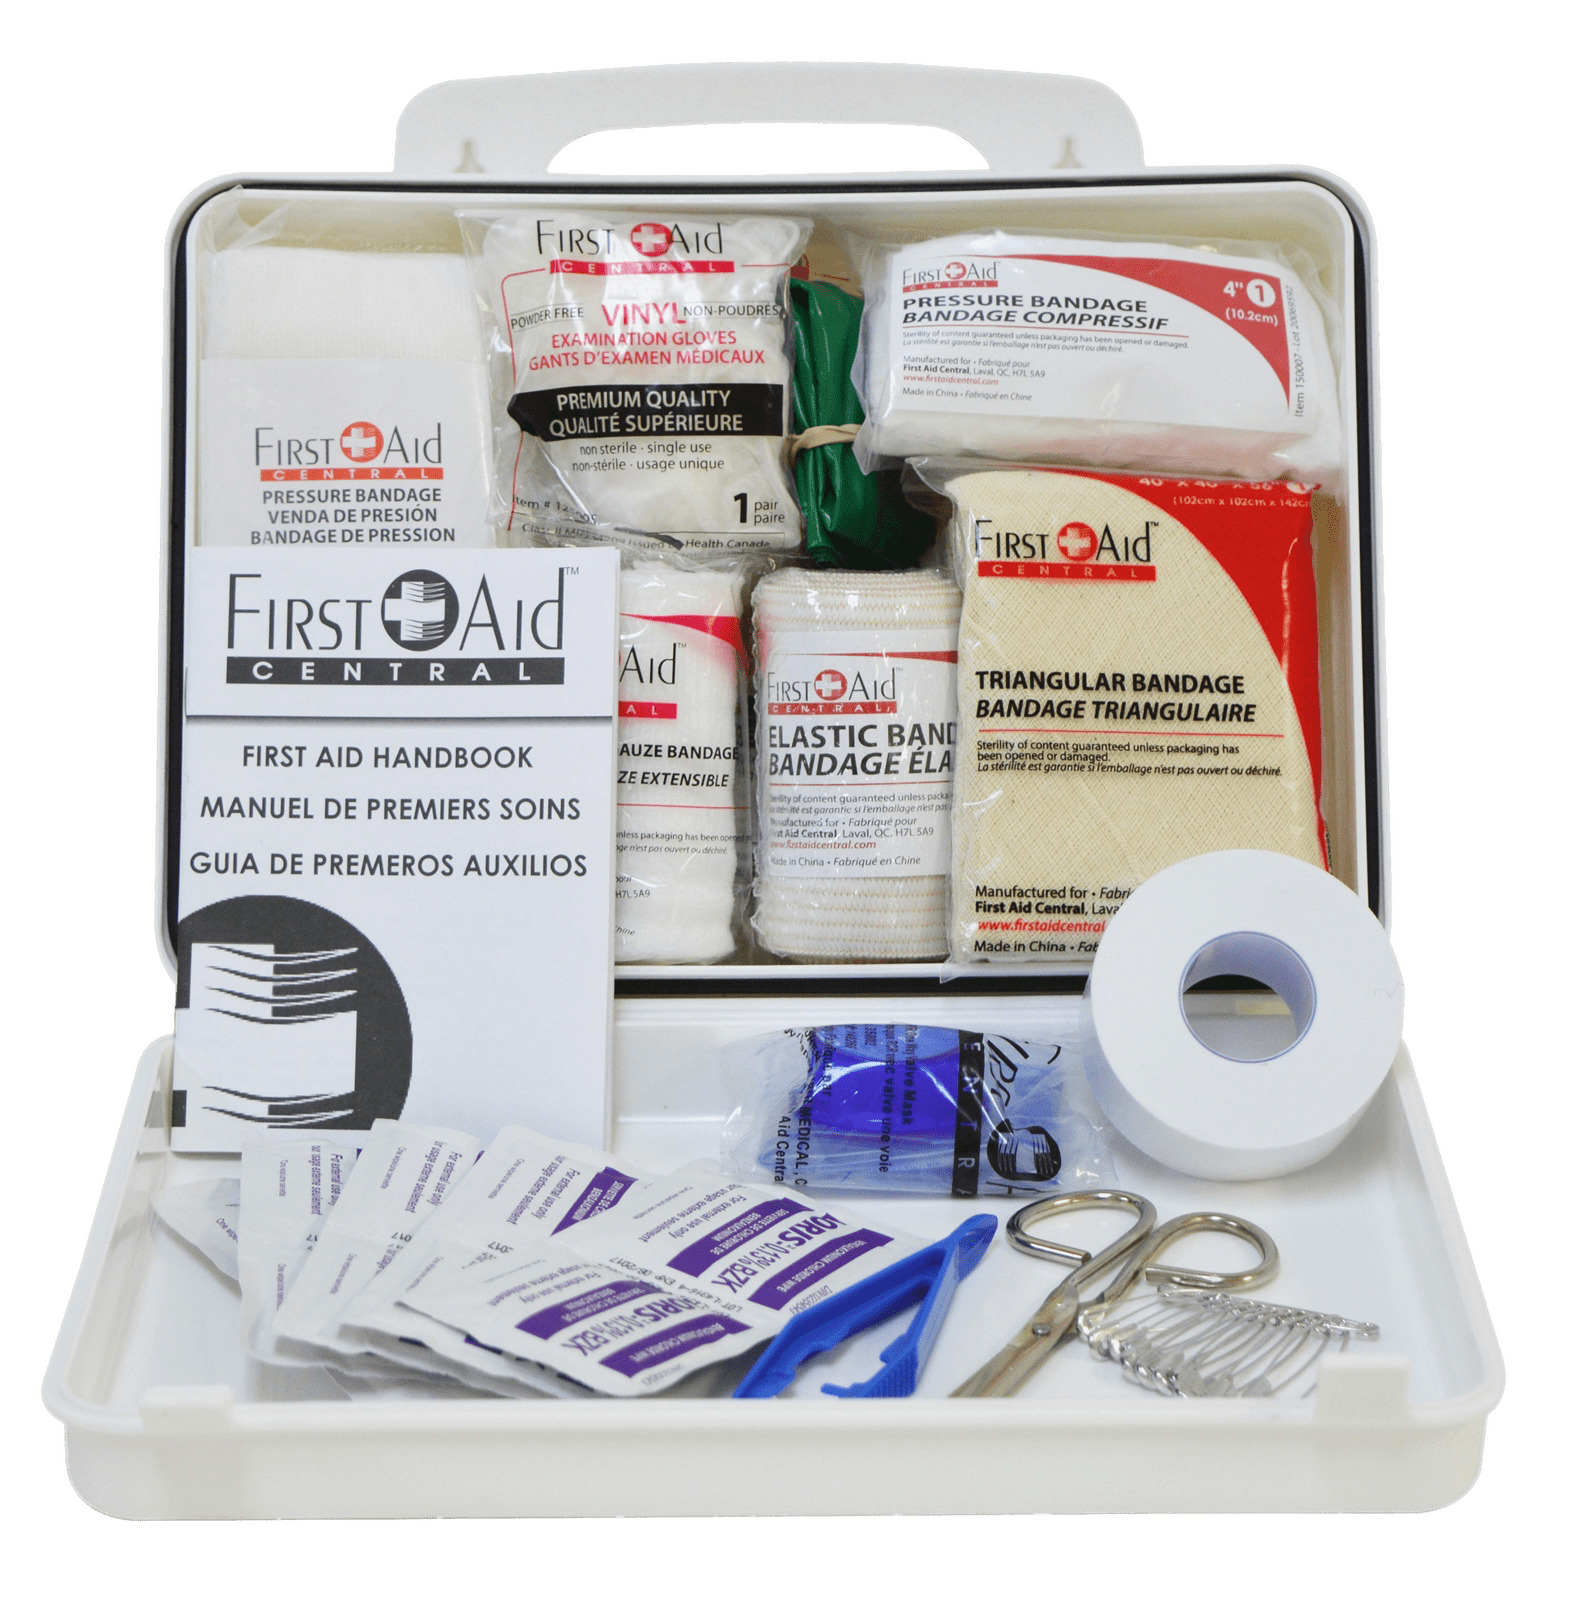 Full First Aid Kit png icons